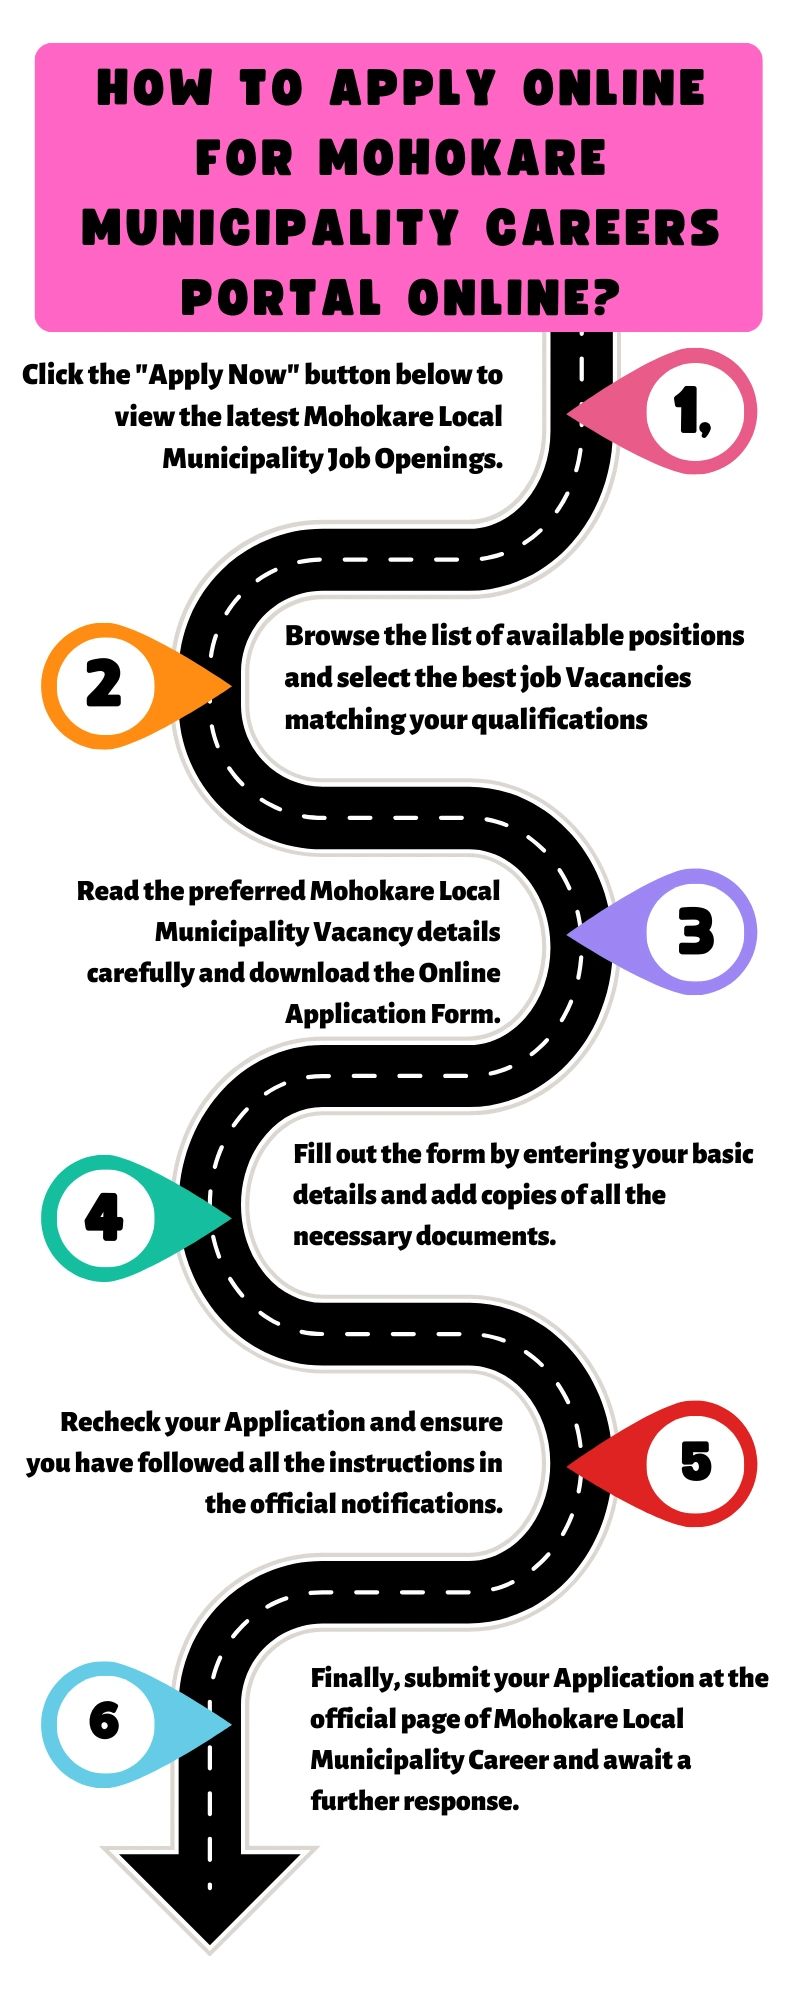 How to Apply online for Raymond Mhlaba Municipality Careers Portal Online